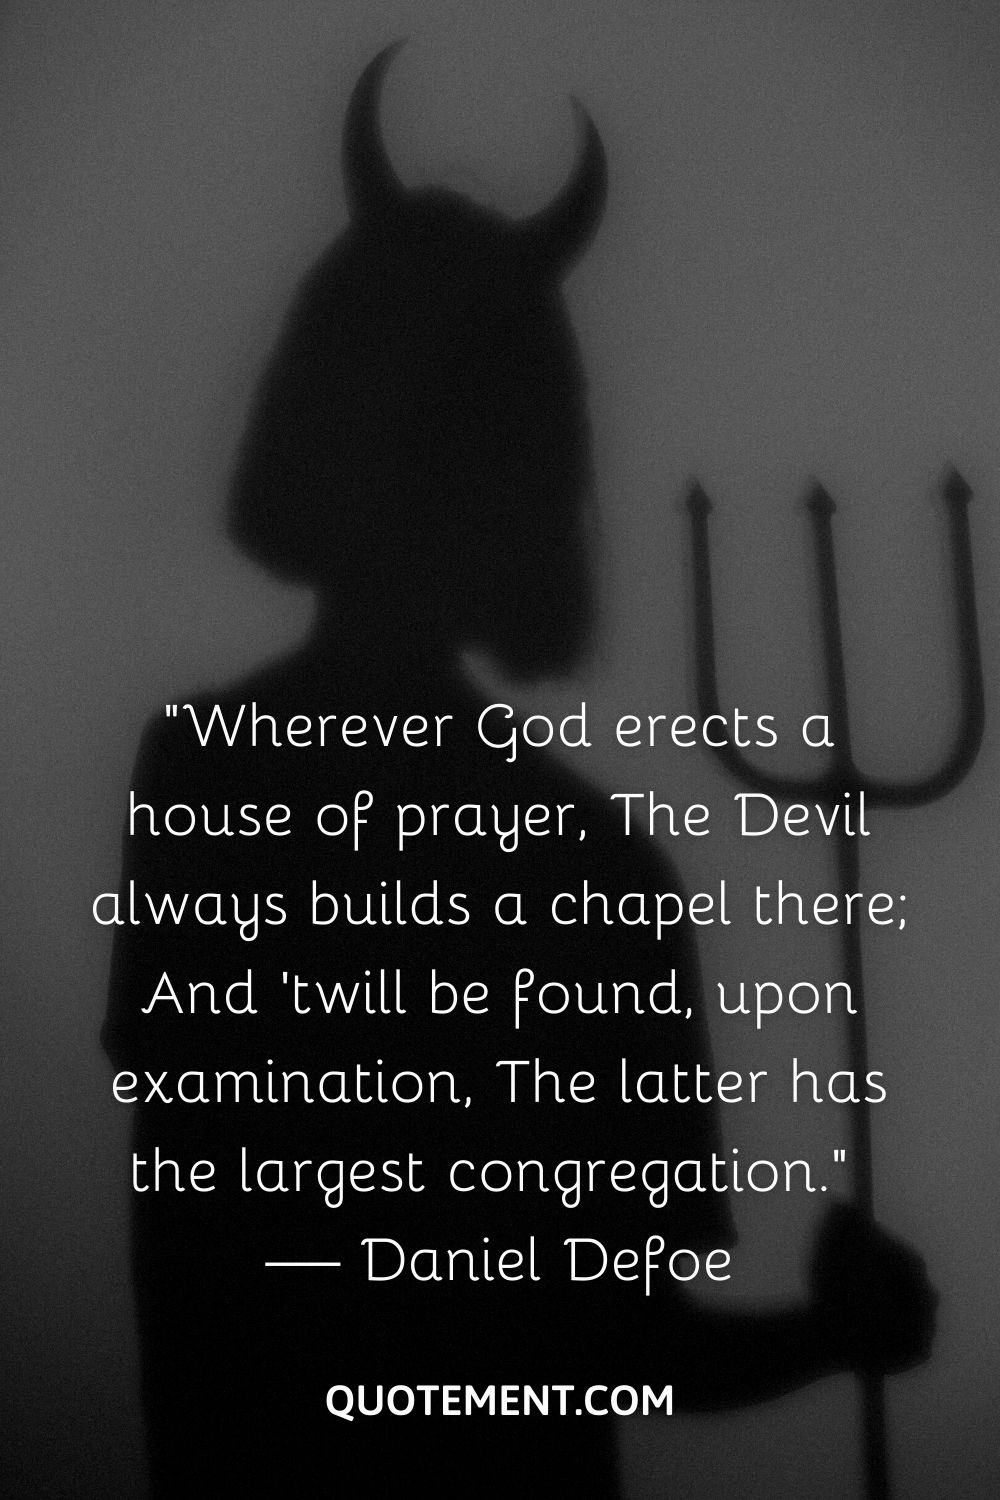 “Wherever God erects a house of prayer, The Devil always builds a chapel there; And ’twill be found, upon examination, The latter has the largest congregation.” — Daniel Defoe